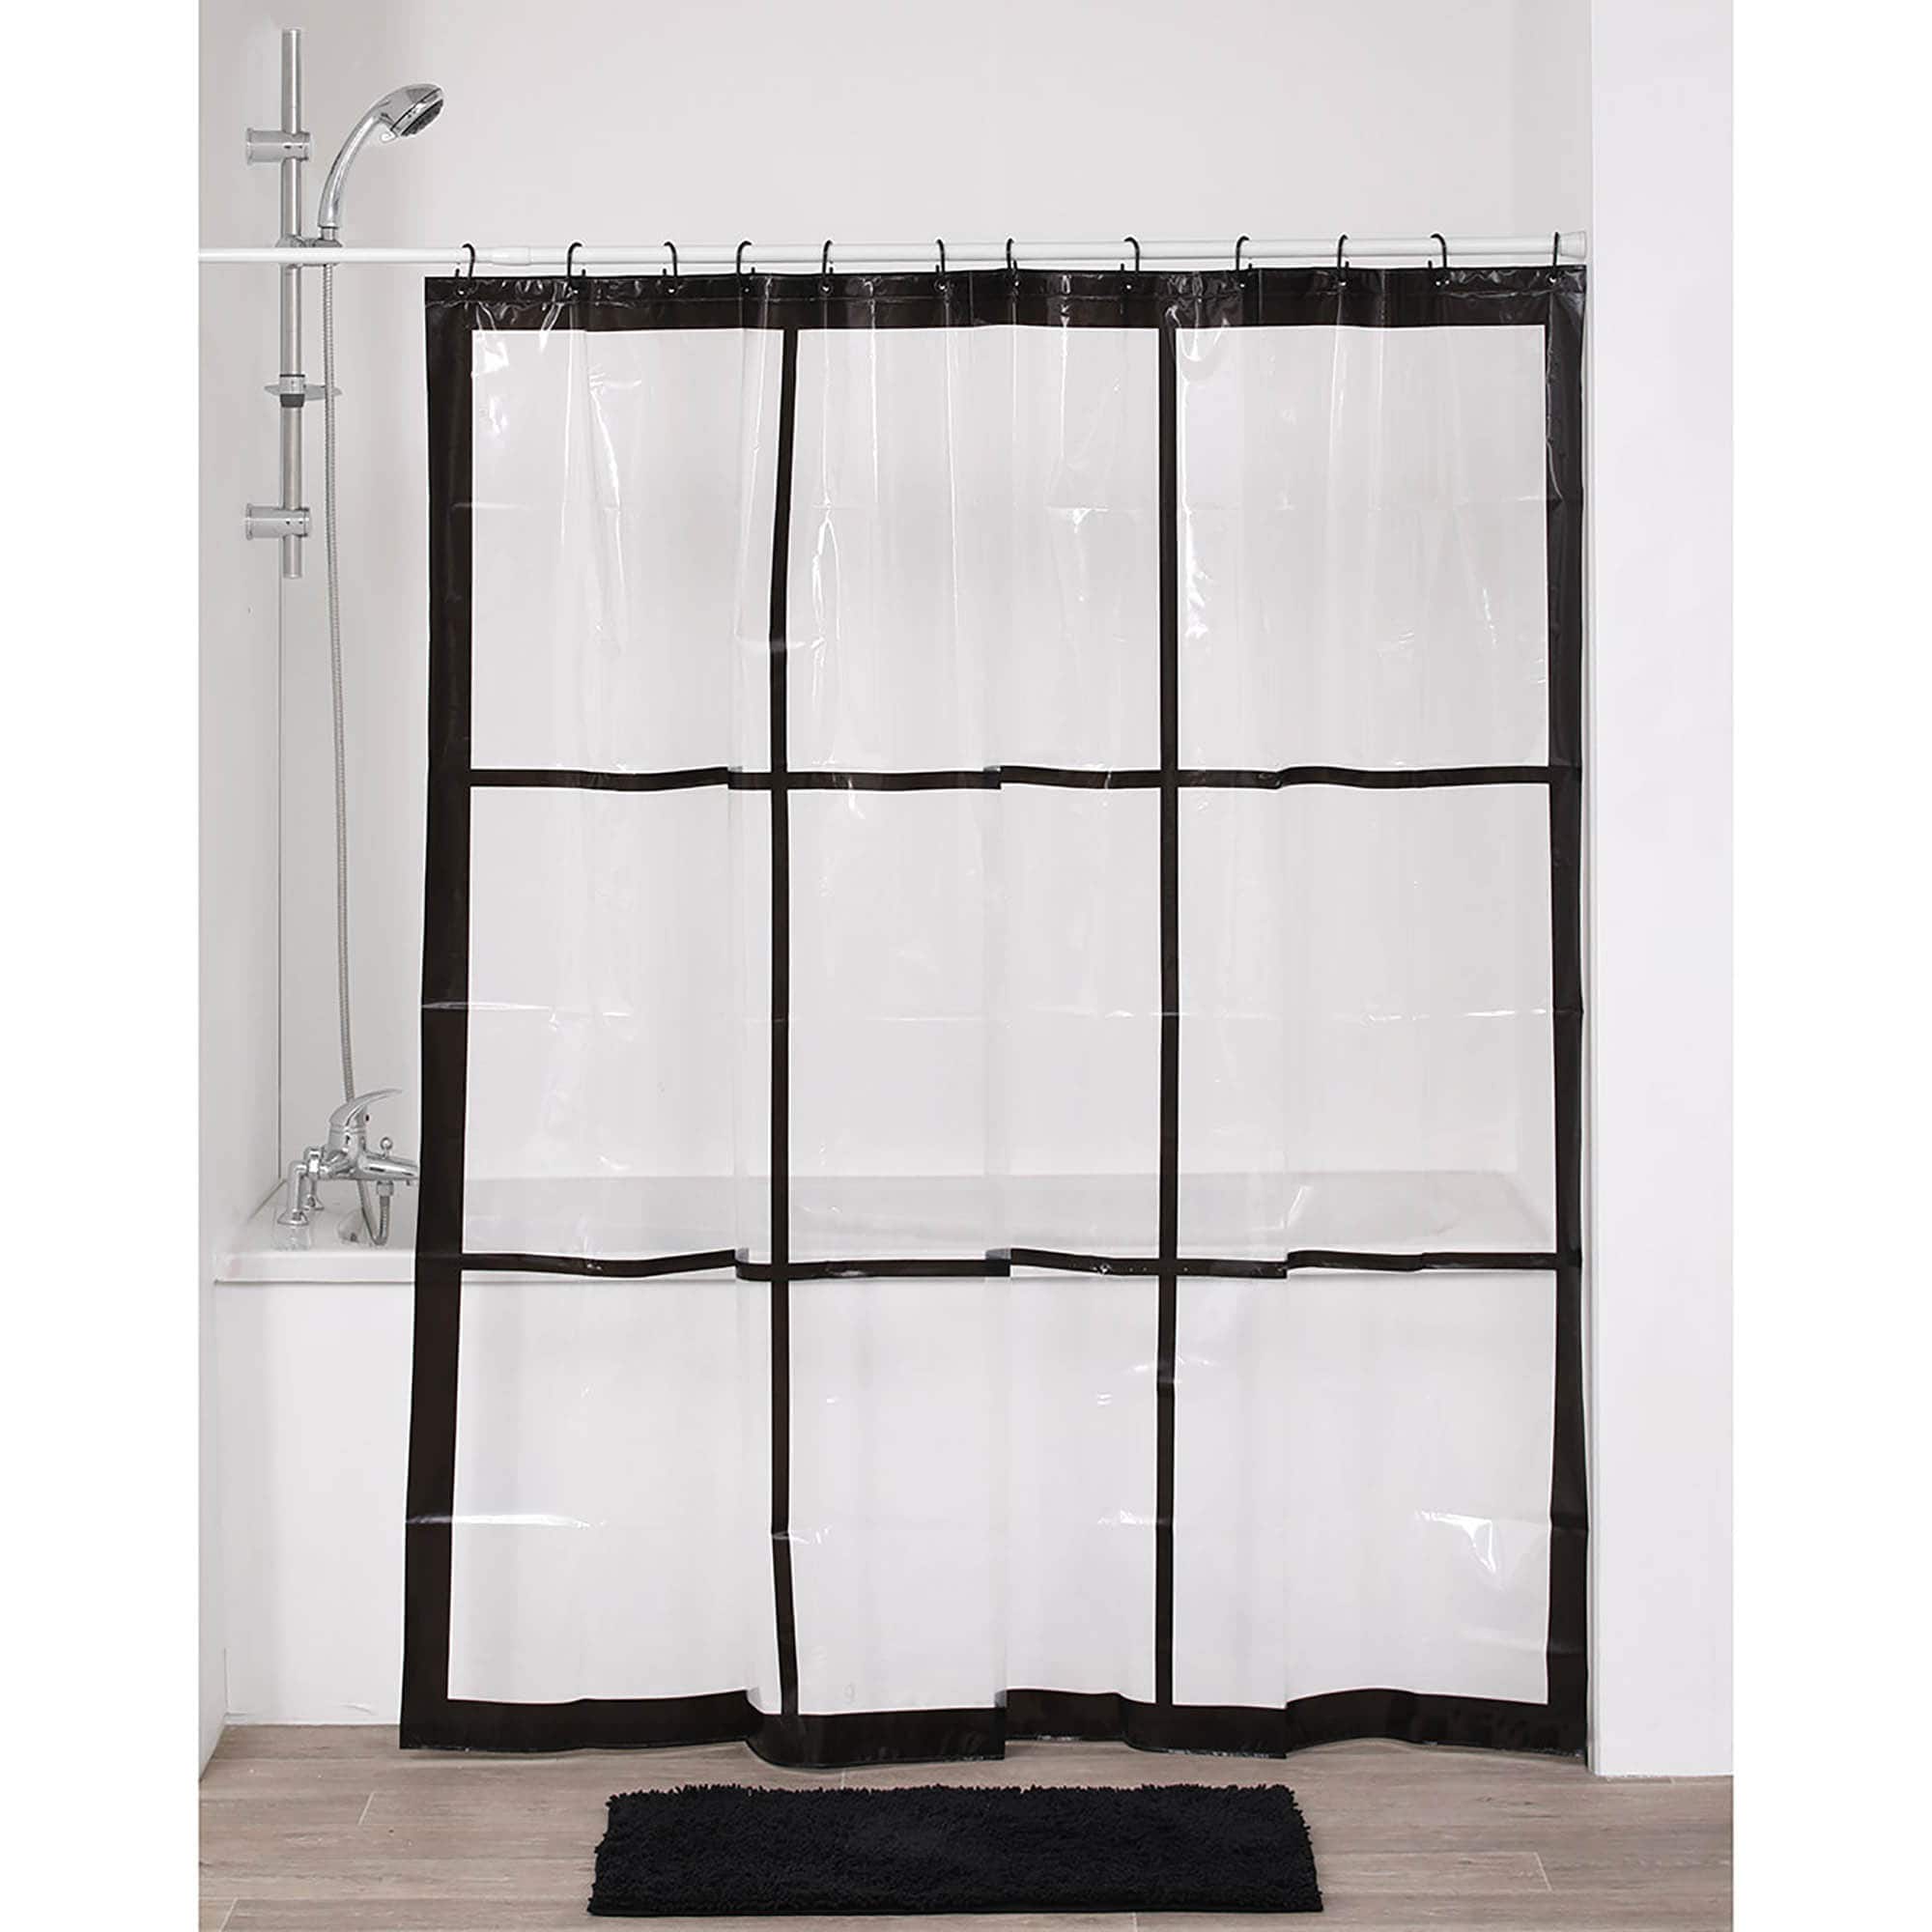 clear PEVA shower curtain with black window motif